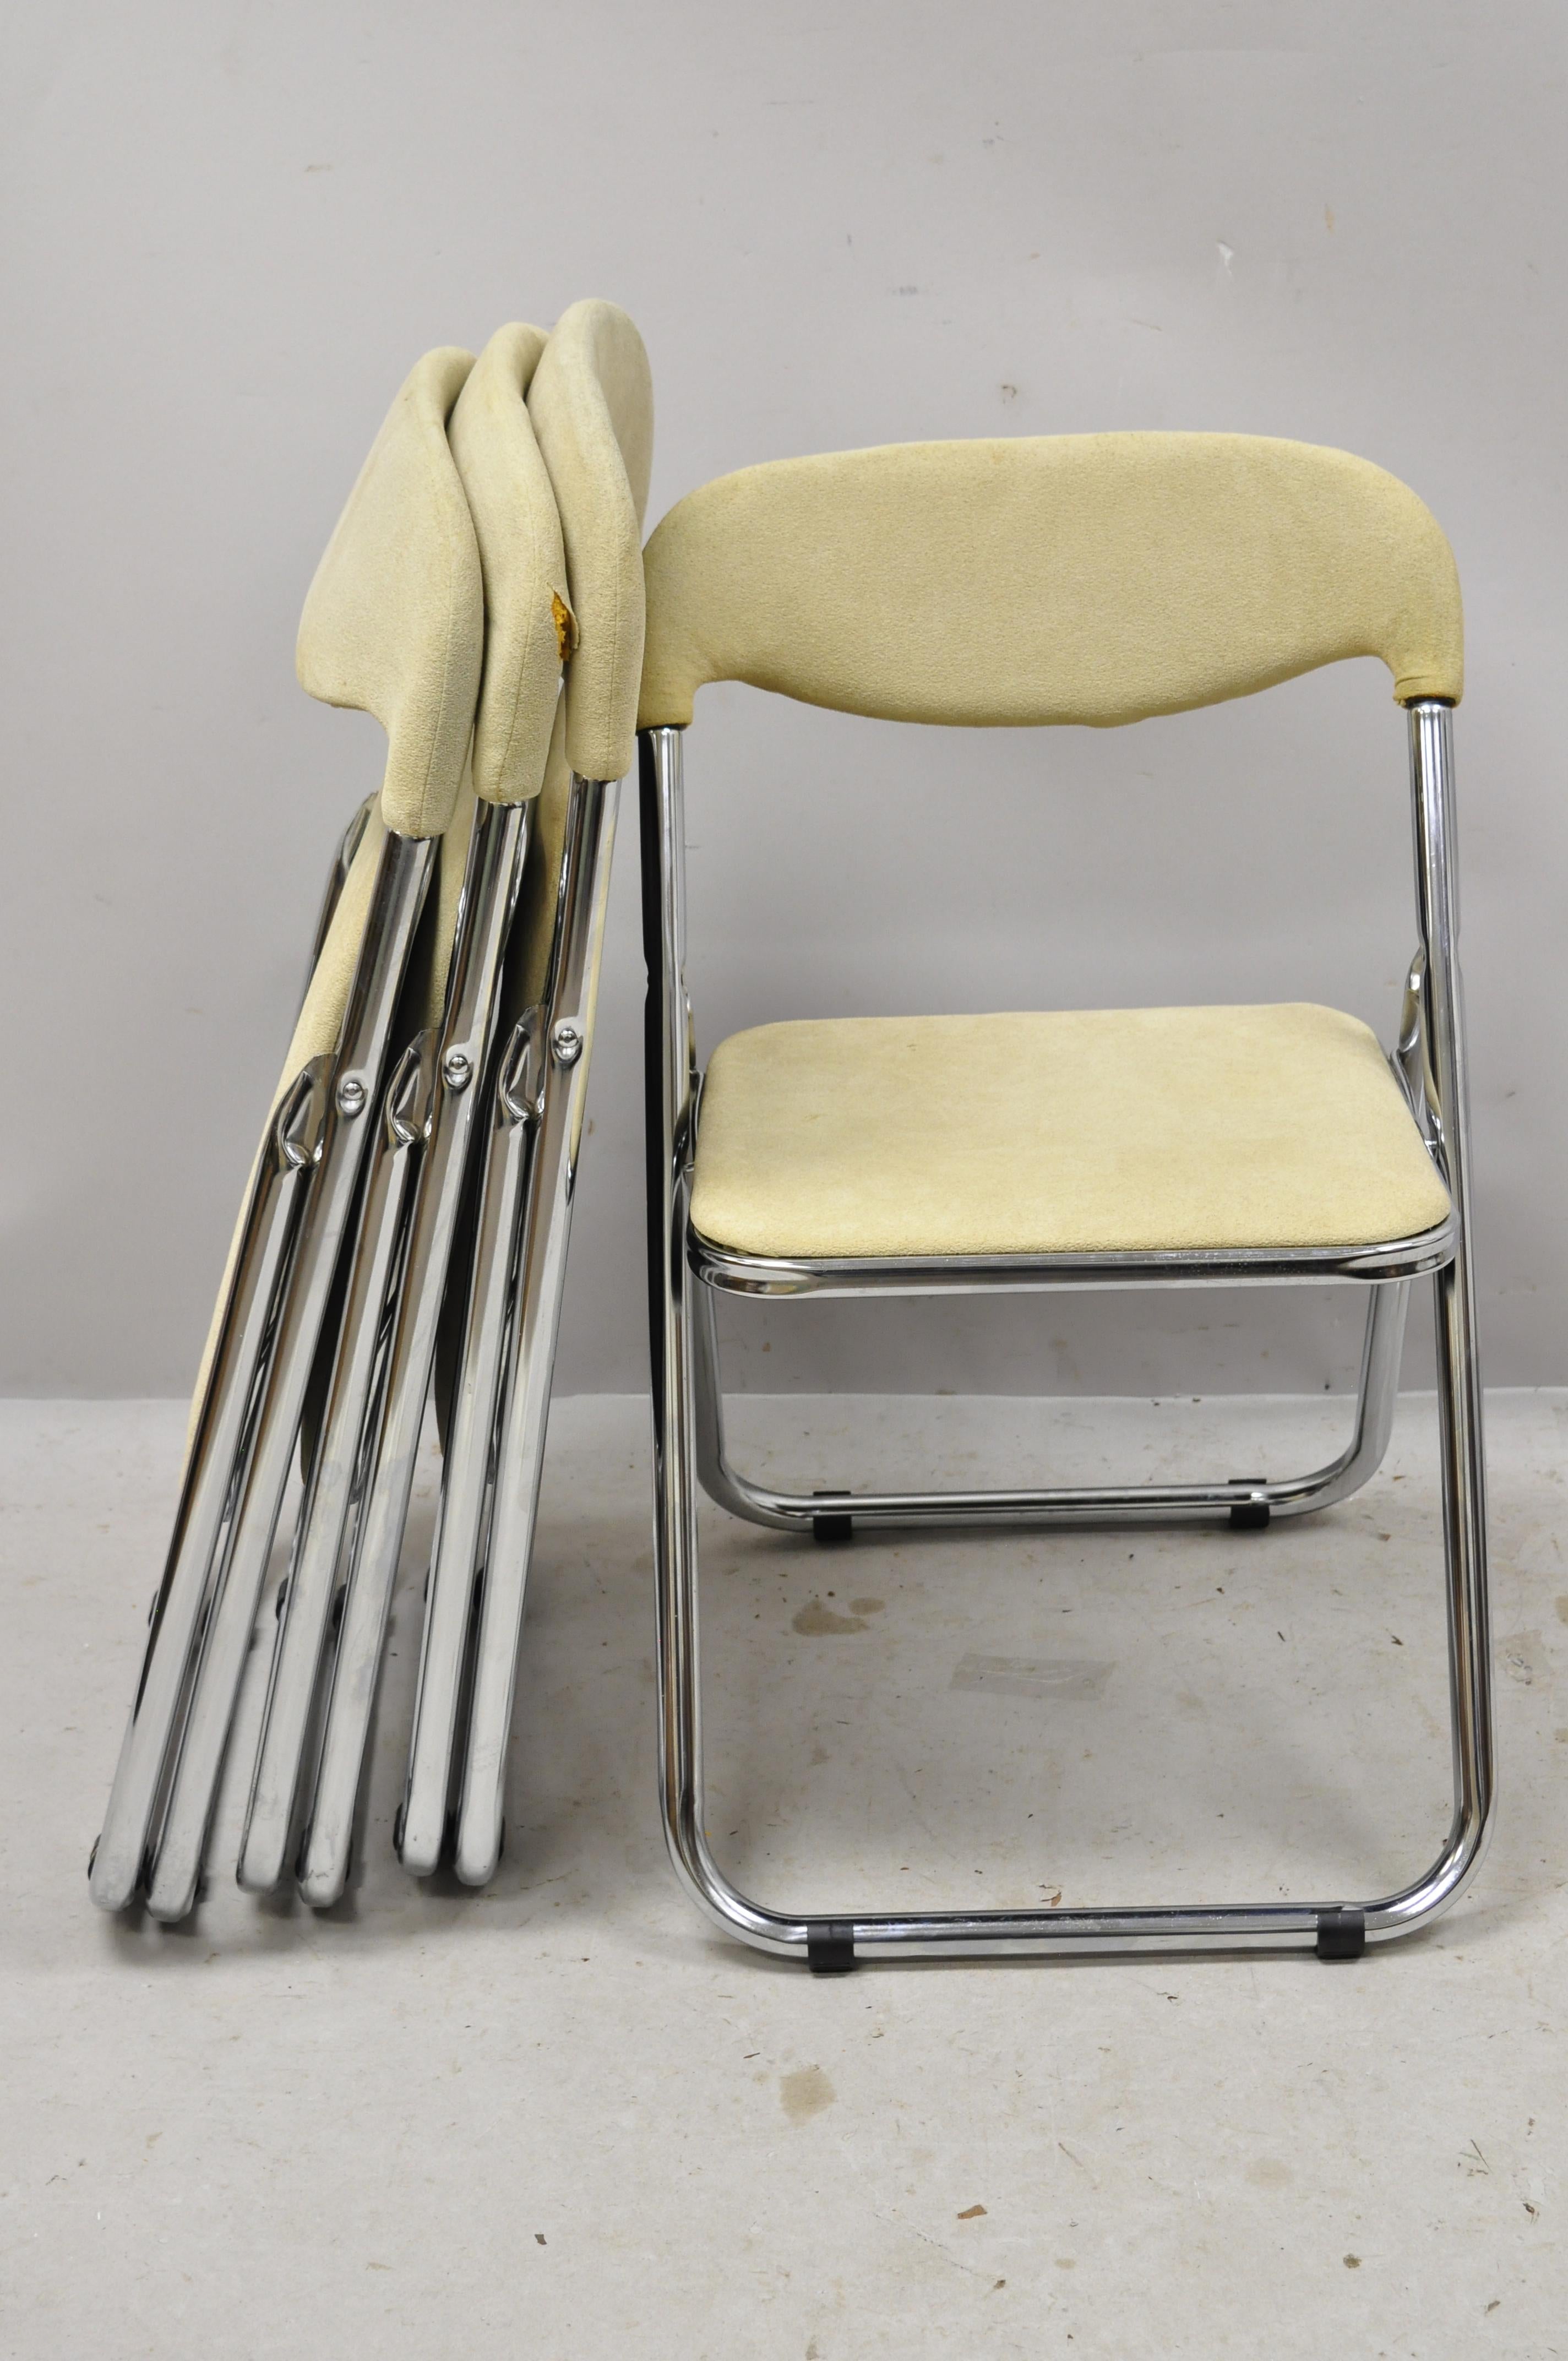 Vintage Italian Mid-Century Modern chrome upholstered folding game chairs, set of 4. Item features folding frames, chrome construction, original label, clean modernist lines, great style and form, circa mid-20th century. Measurements: Open: 25